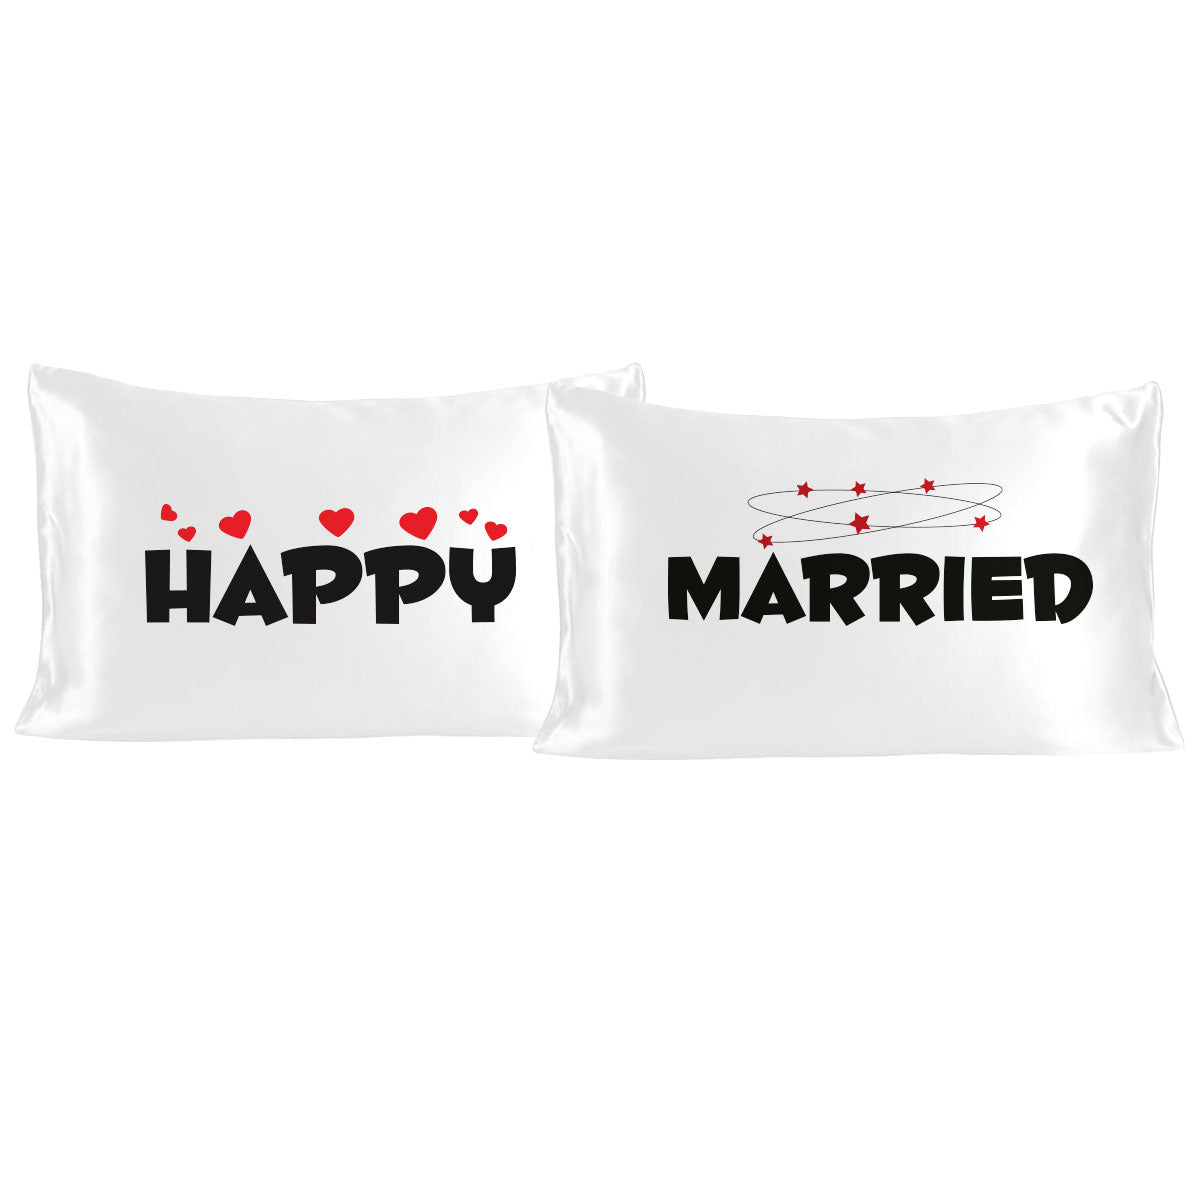 White Satin Silky Pillow Covers Set, Luxury Soft, Smooth Feel with Love Messages from "Happy Married" Stoa Paris Pillow Tok Collection